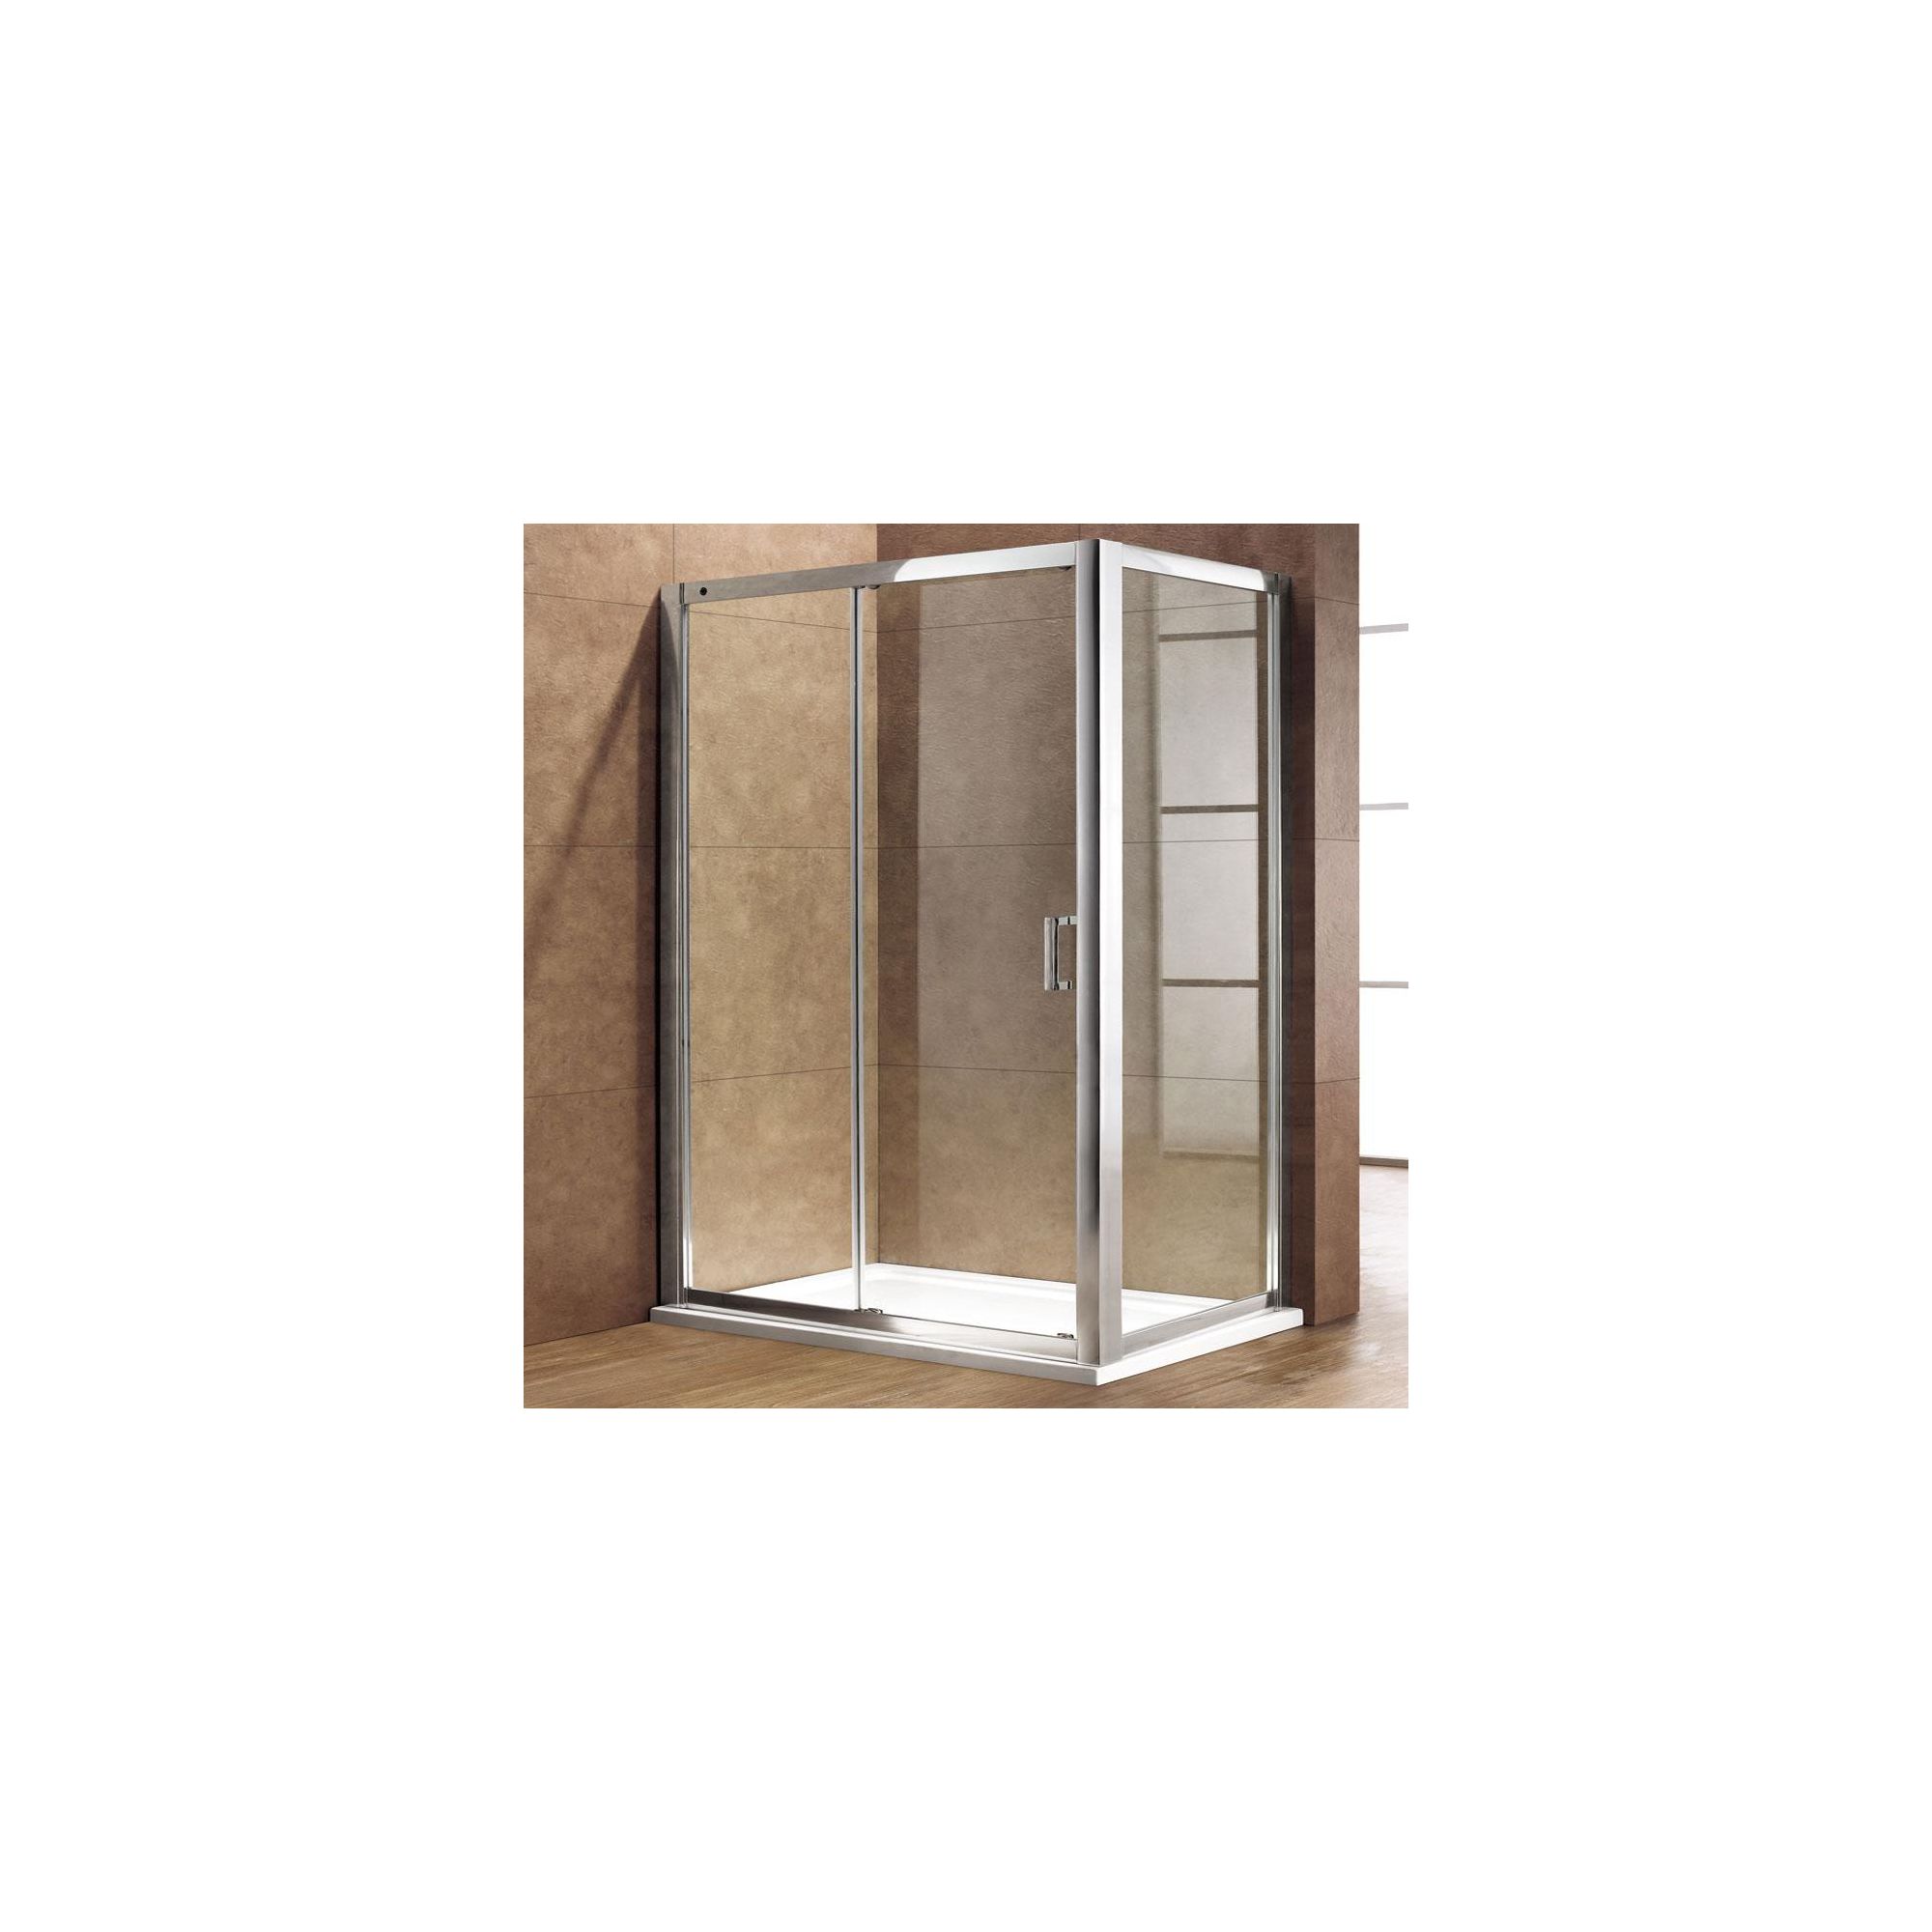 Duchy Premium Single Sliding Door Shower Enclosure, 1000mm x 1000mm, 8mm Glass, Low Profile Tray at Tesco Direct